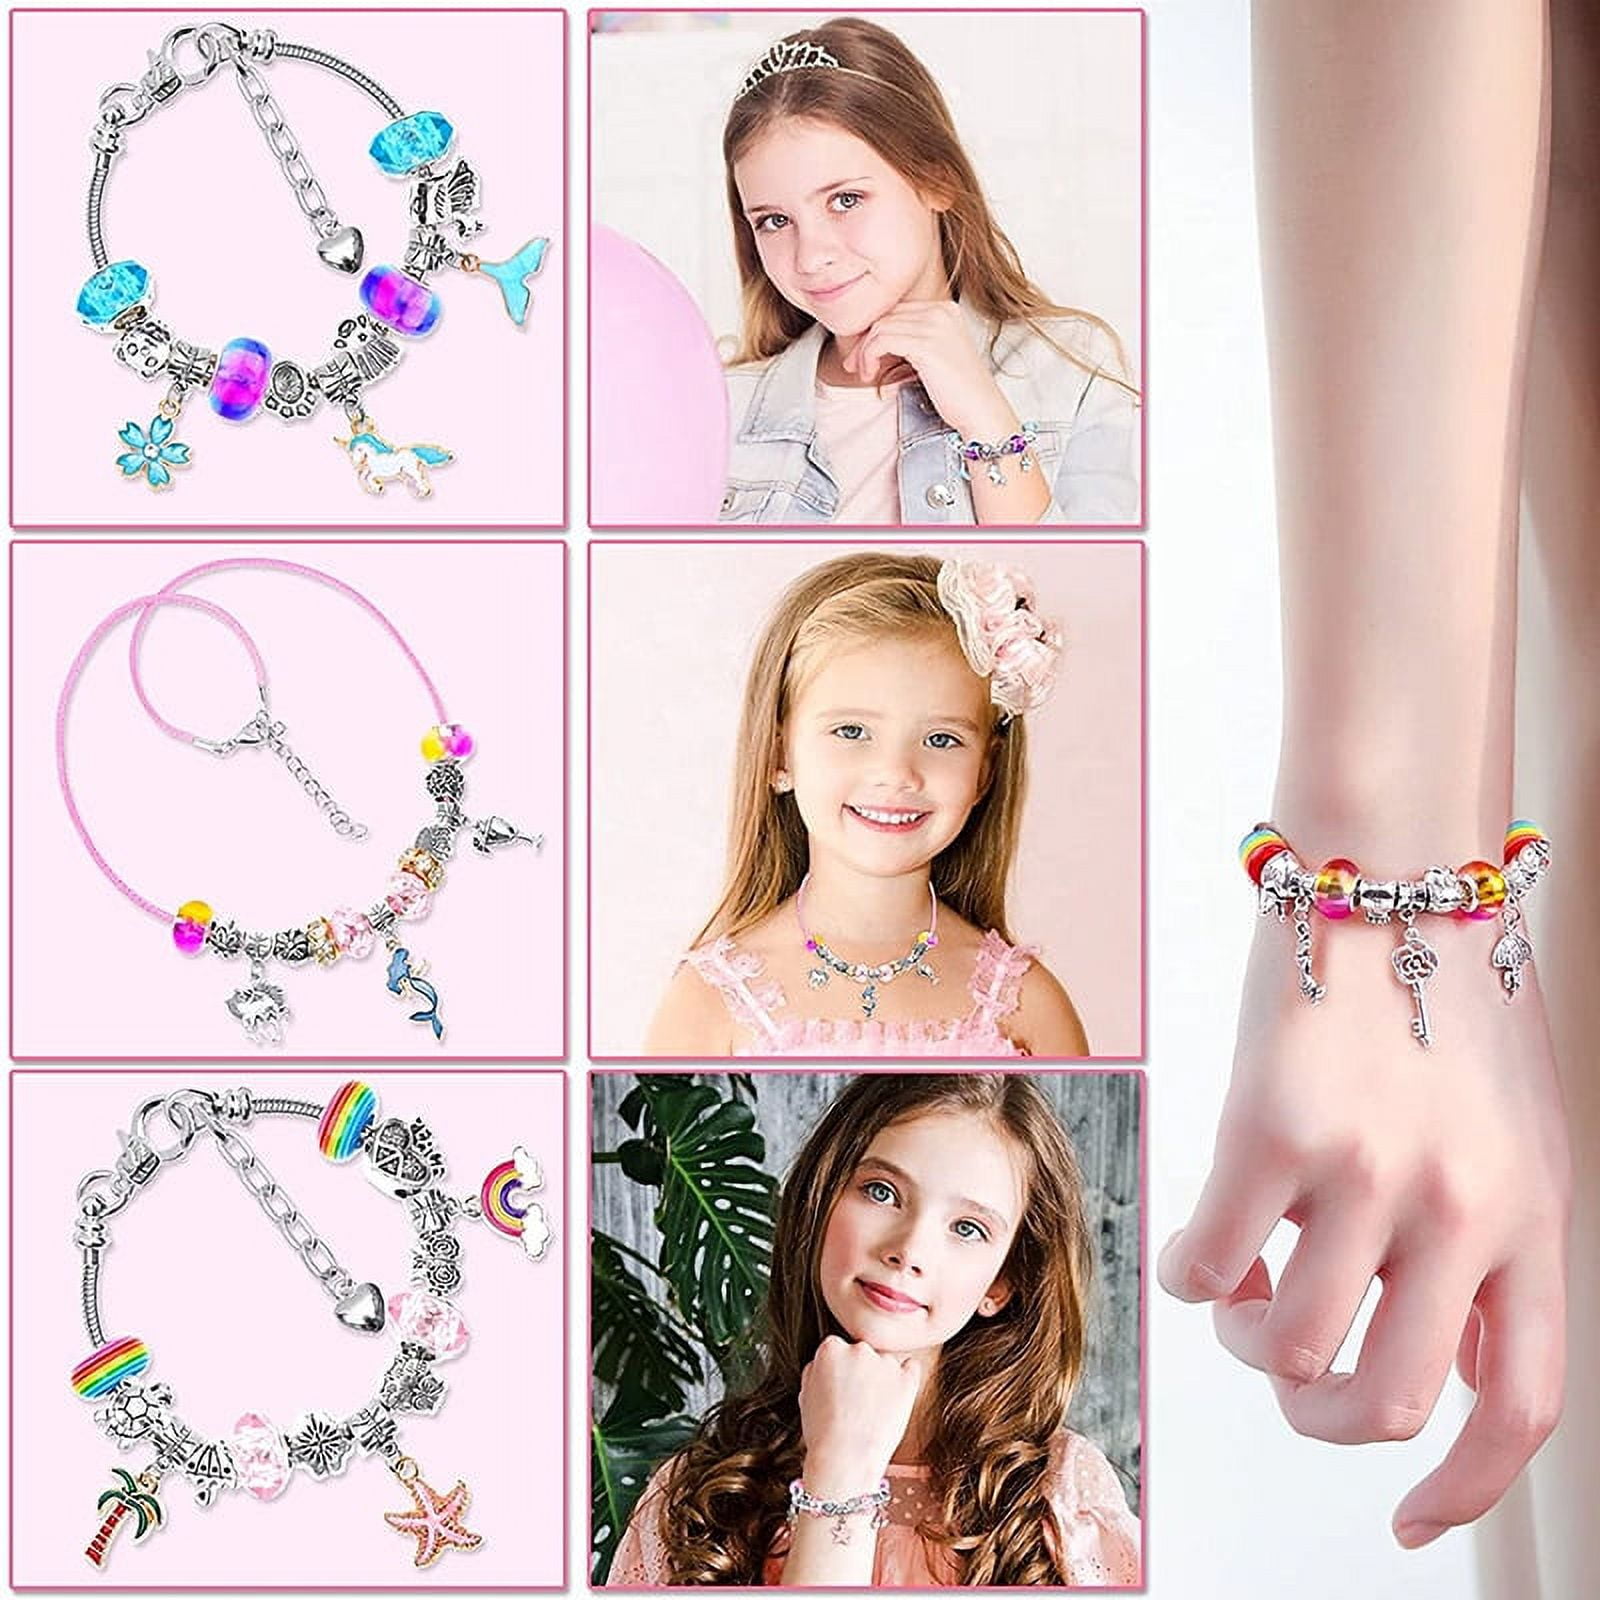 AMAZING TIME 130 Pieces DIY Charm Bracelet Making Kit Including Jewelry  Beads, Snake Chains for Girls